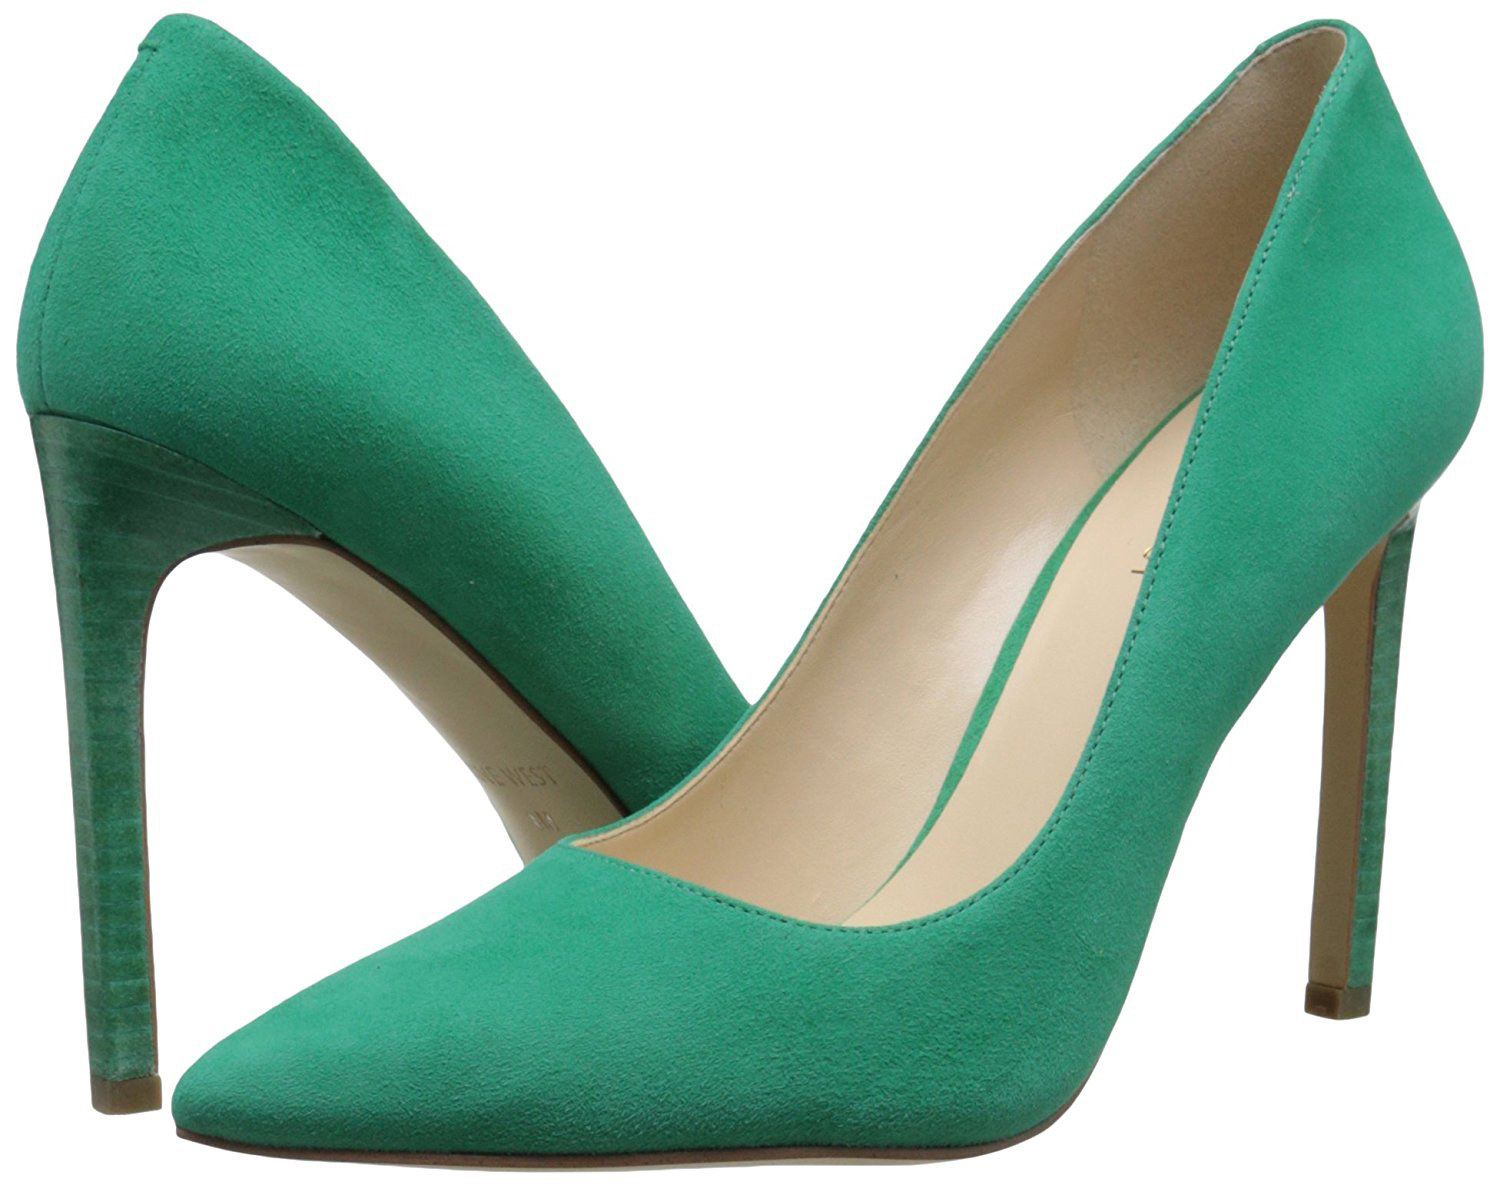 27 Comfy And Cheap Heels You Need In Your Closet Right Now